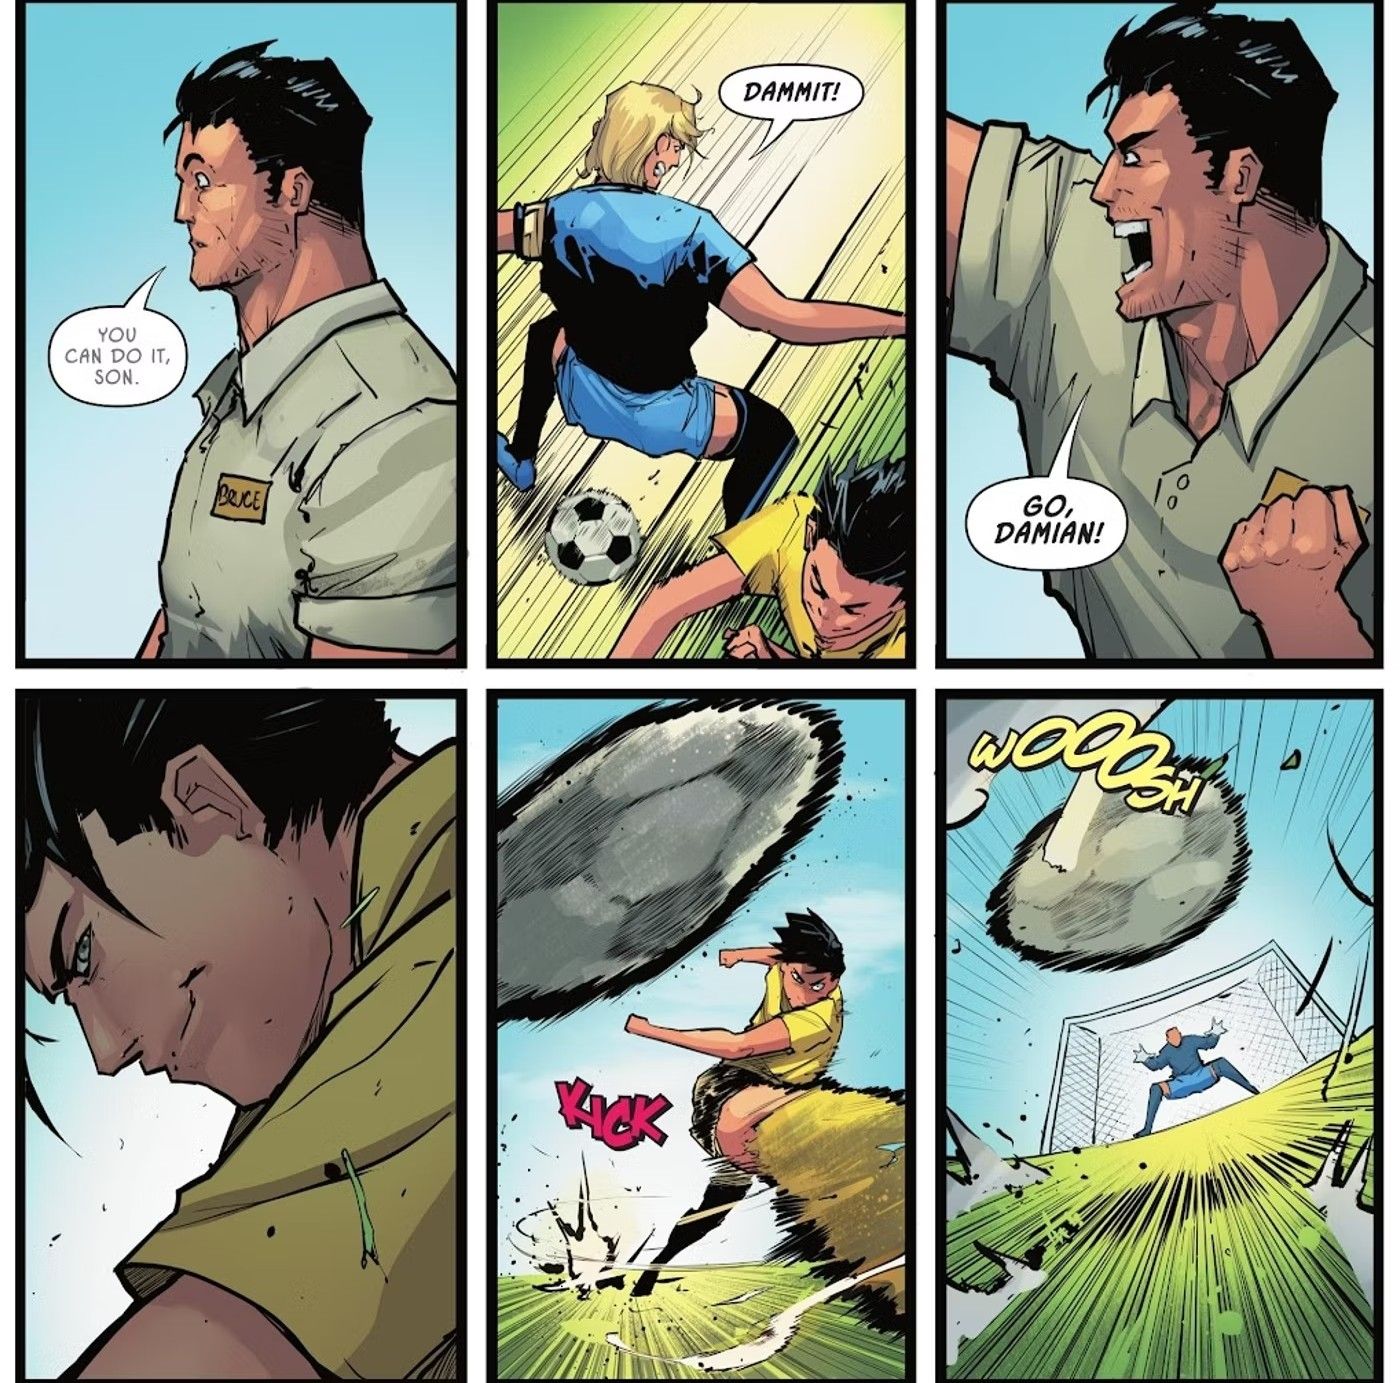 Comic book panels: Bruce Wayne watches his son Damian playing soccer.